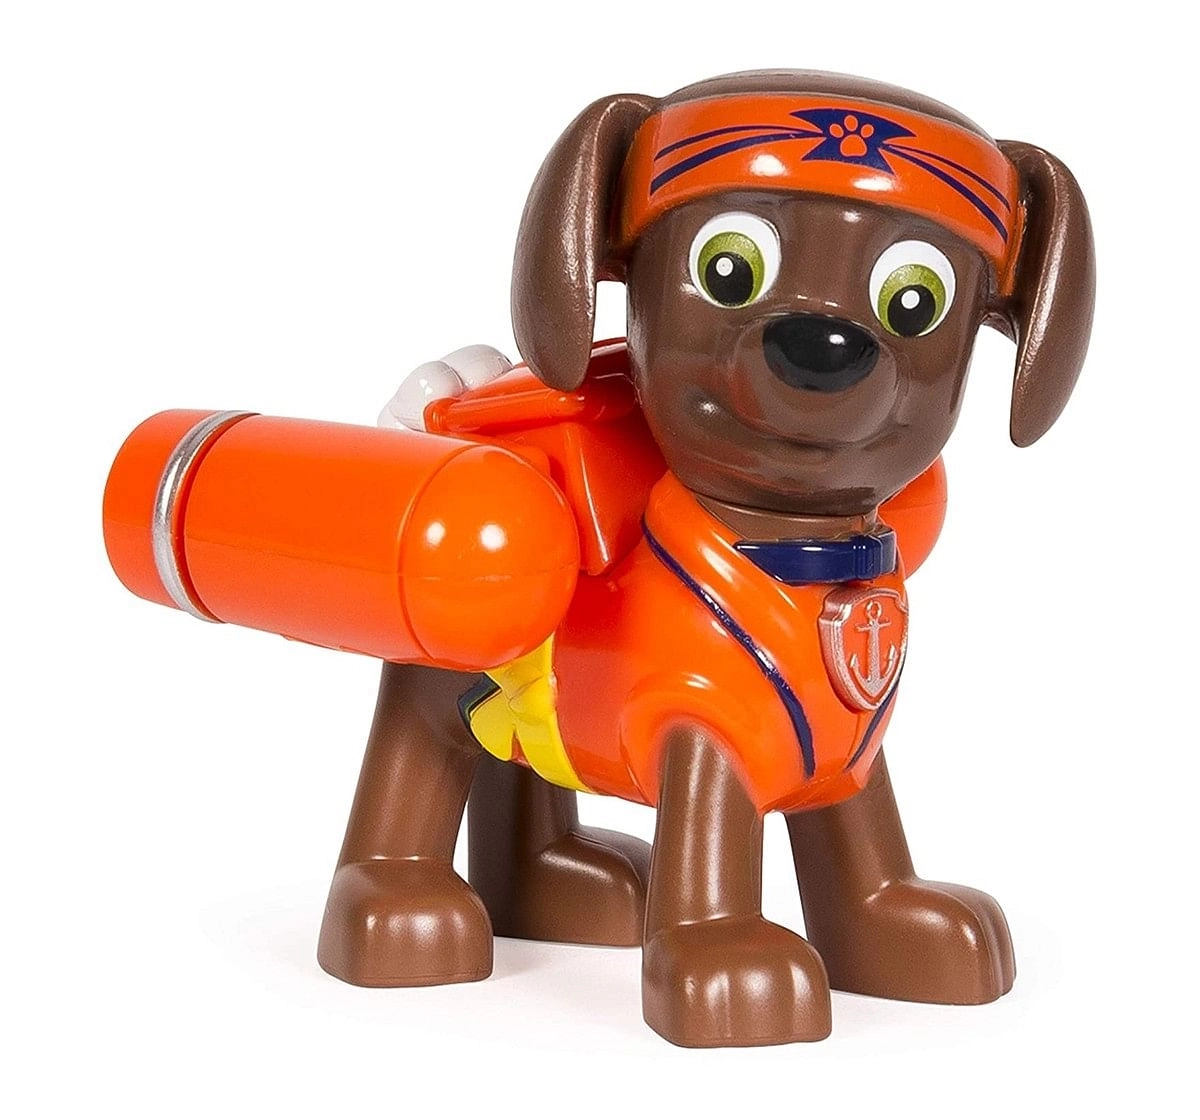 Paw Patrol Hero Pup FigureAssorted Activity Toys for Kids age 3Y+ 